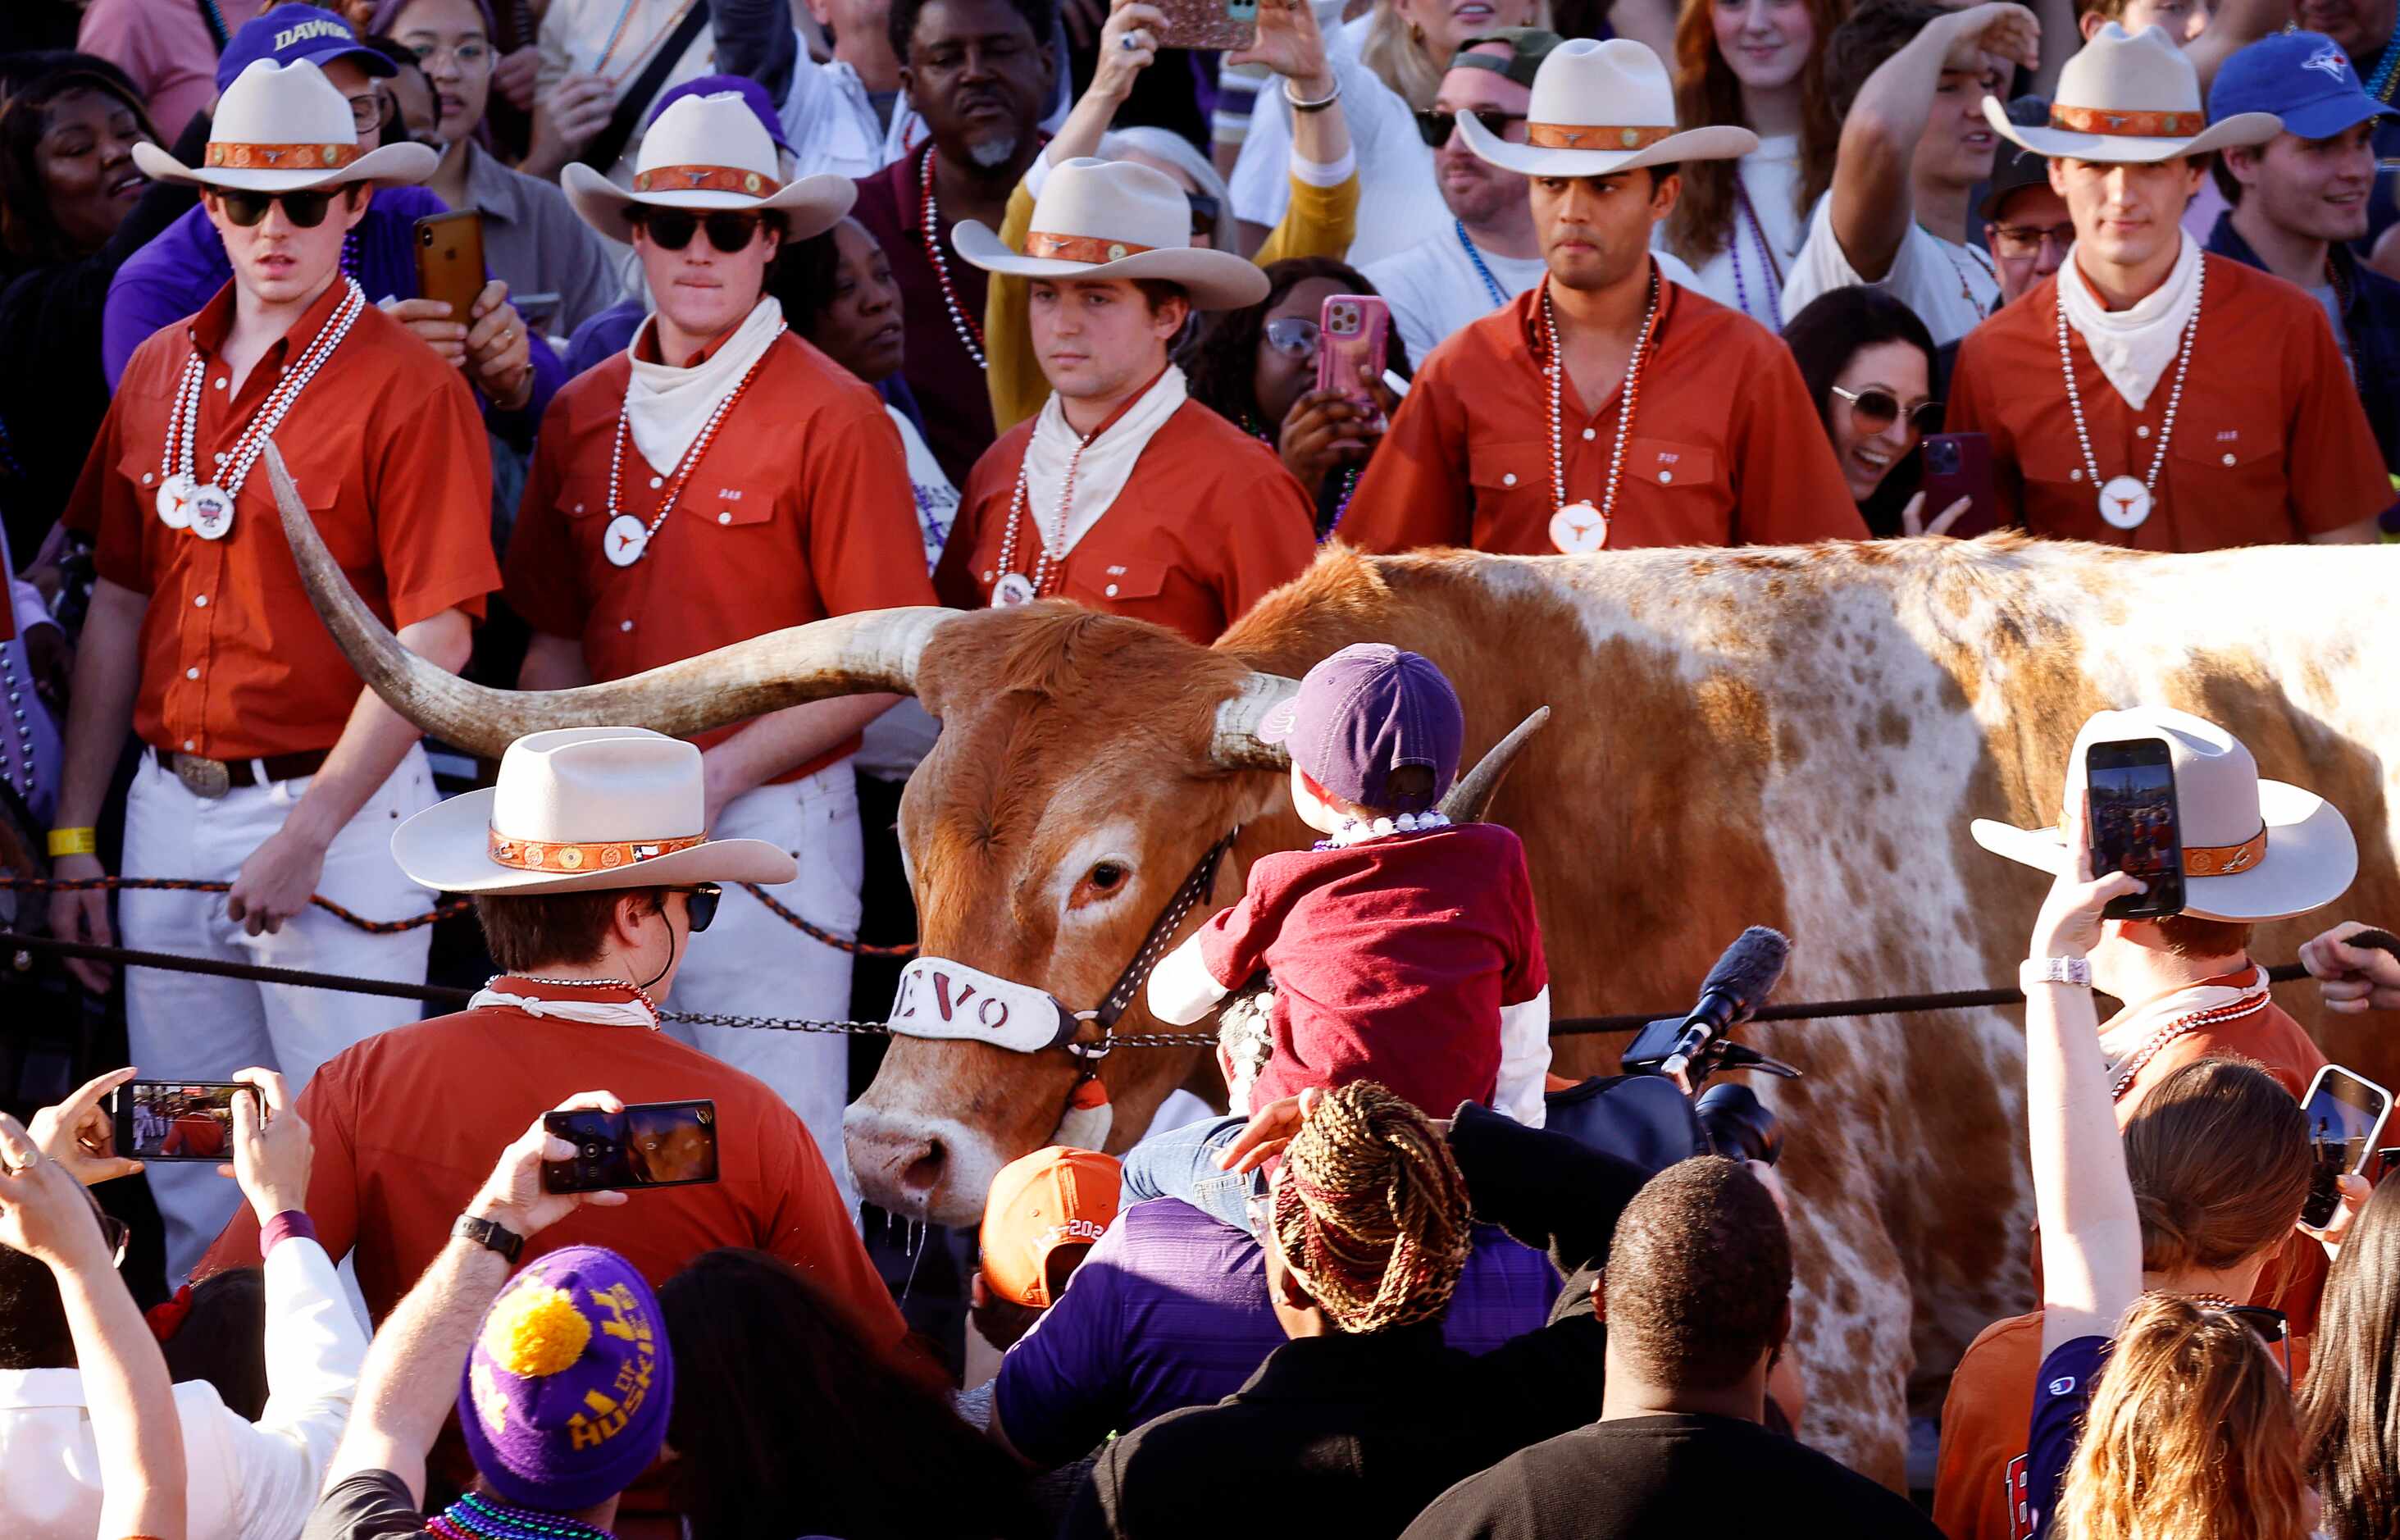 The Silver Spurs escort Bevo, the Texas Longhorns mascot, down Decatur St during the Mardi...